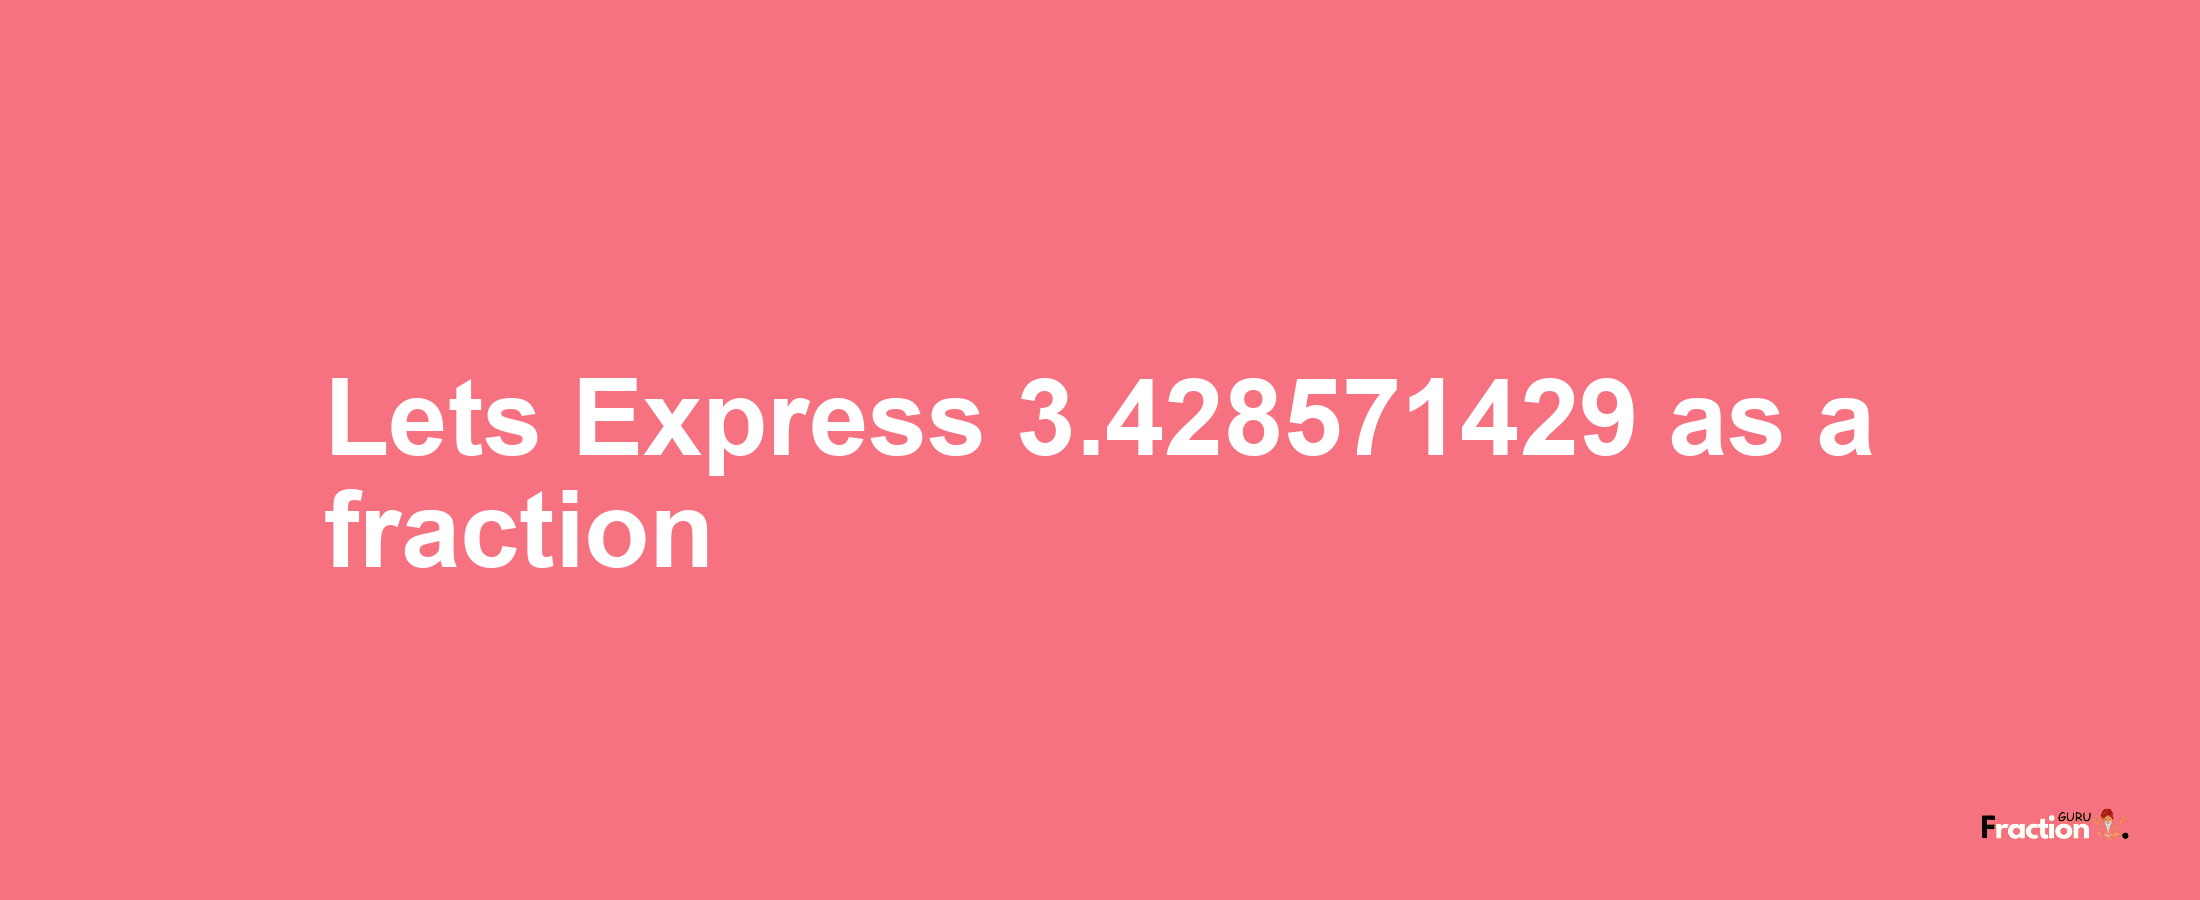 Lets Express 3.428571429 as afraction